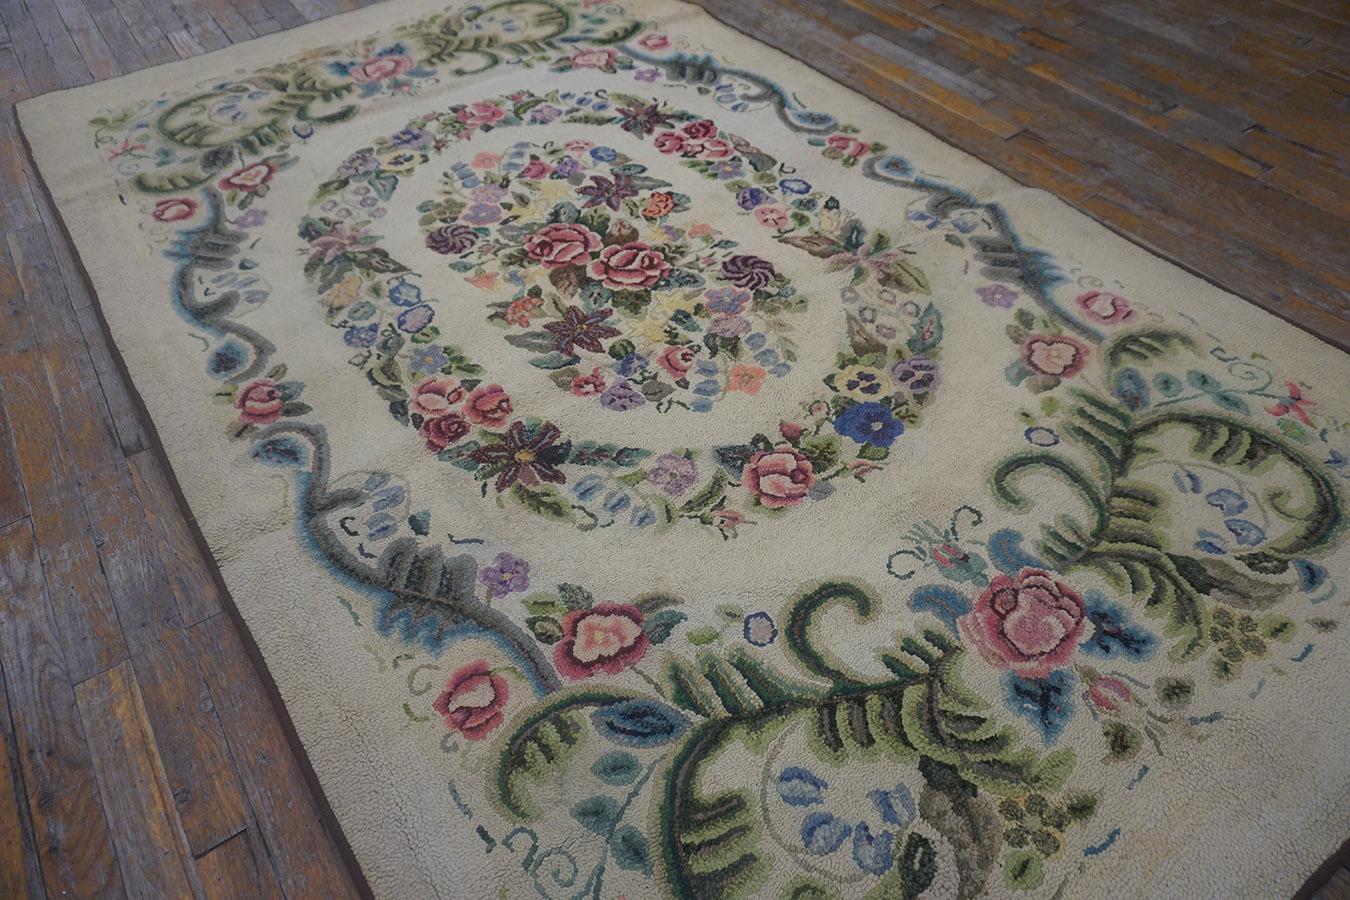 Hand-Woven Early 20th Century American Hooked Rug ( 4'2